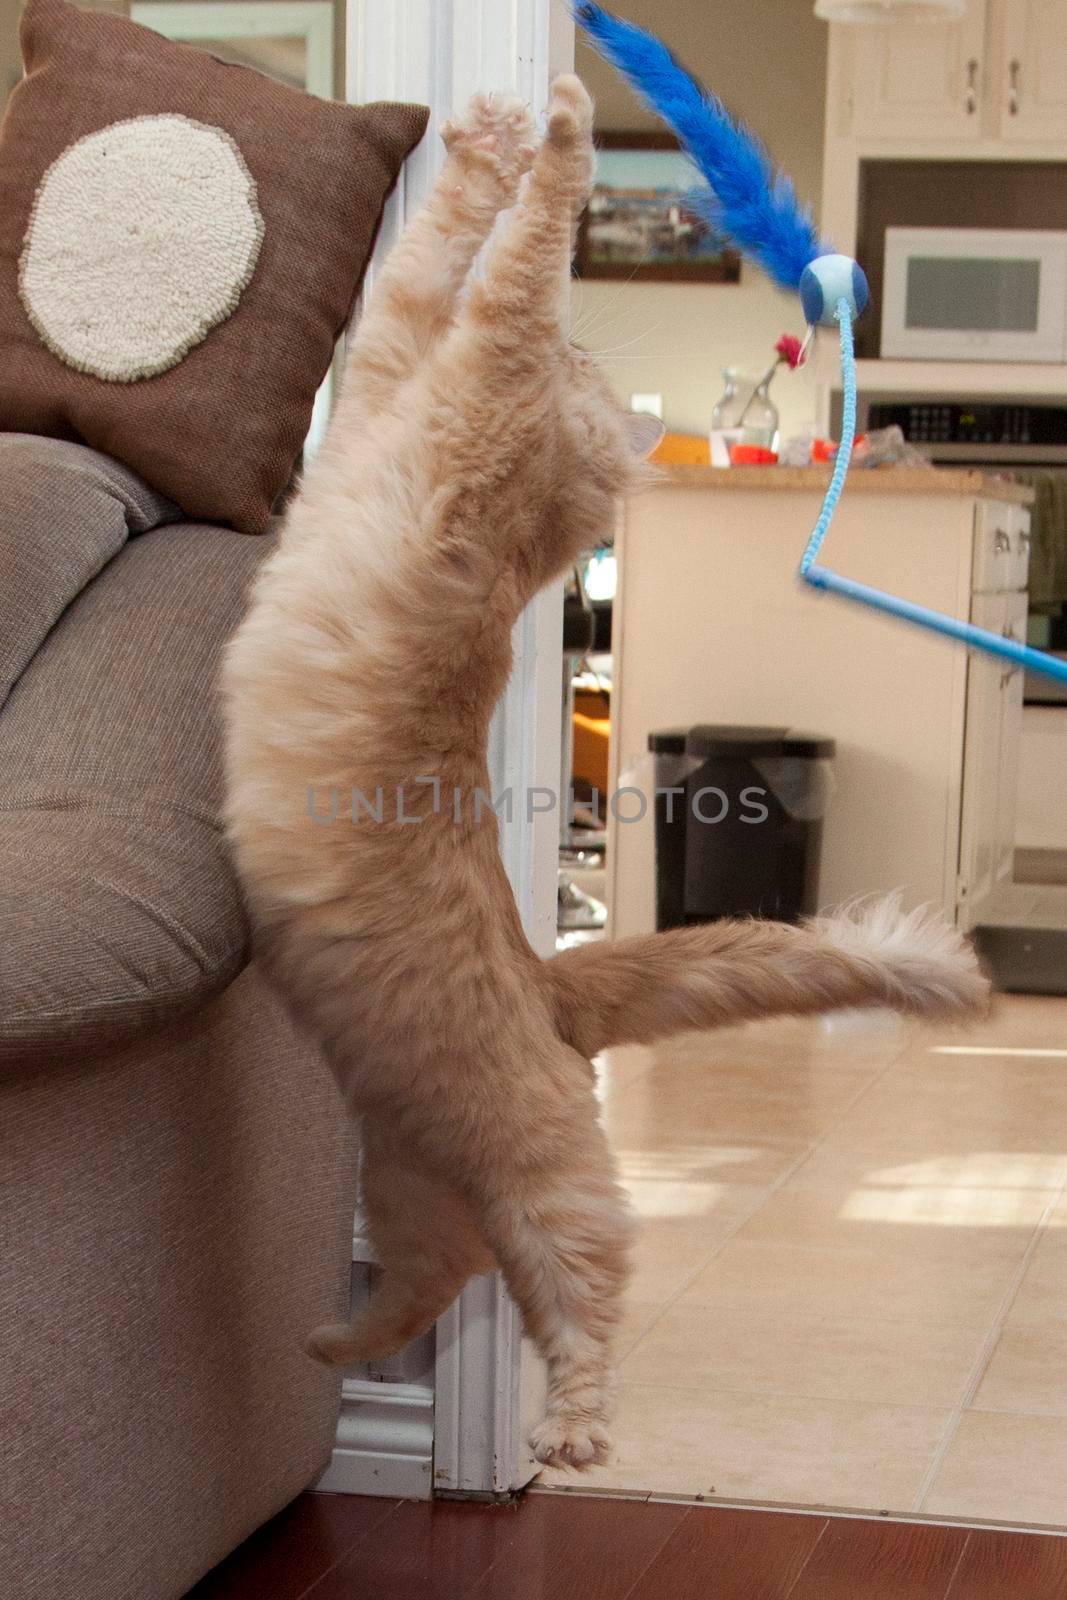  A cat is being silly jumping high off the ground chasing a toy 